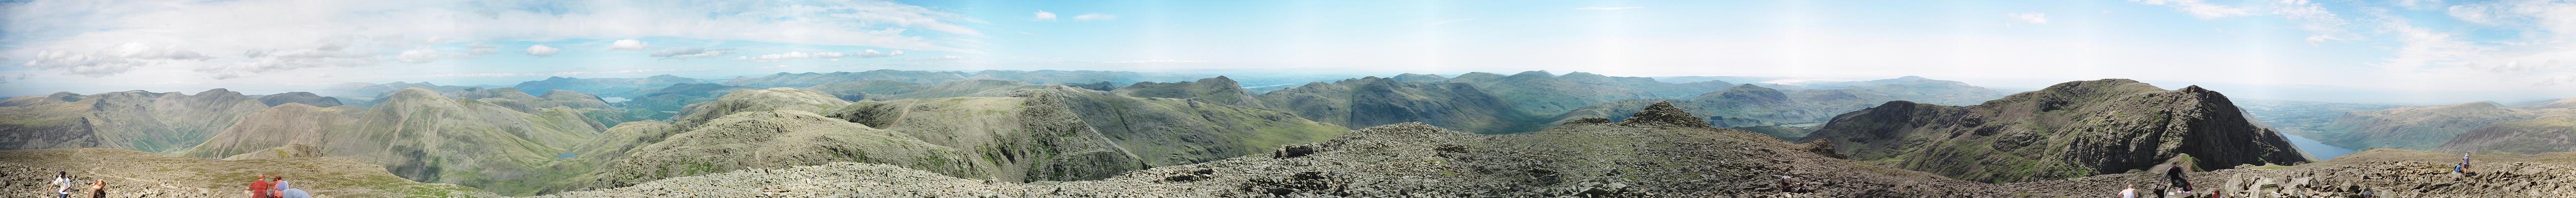 Scafell Pike - Complete Panorama